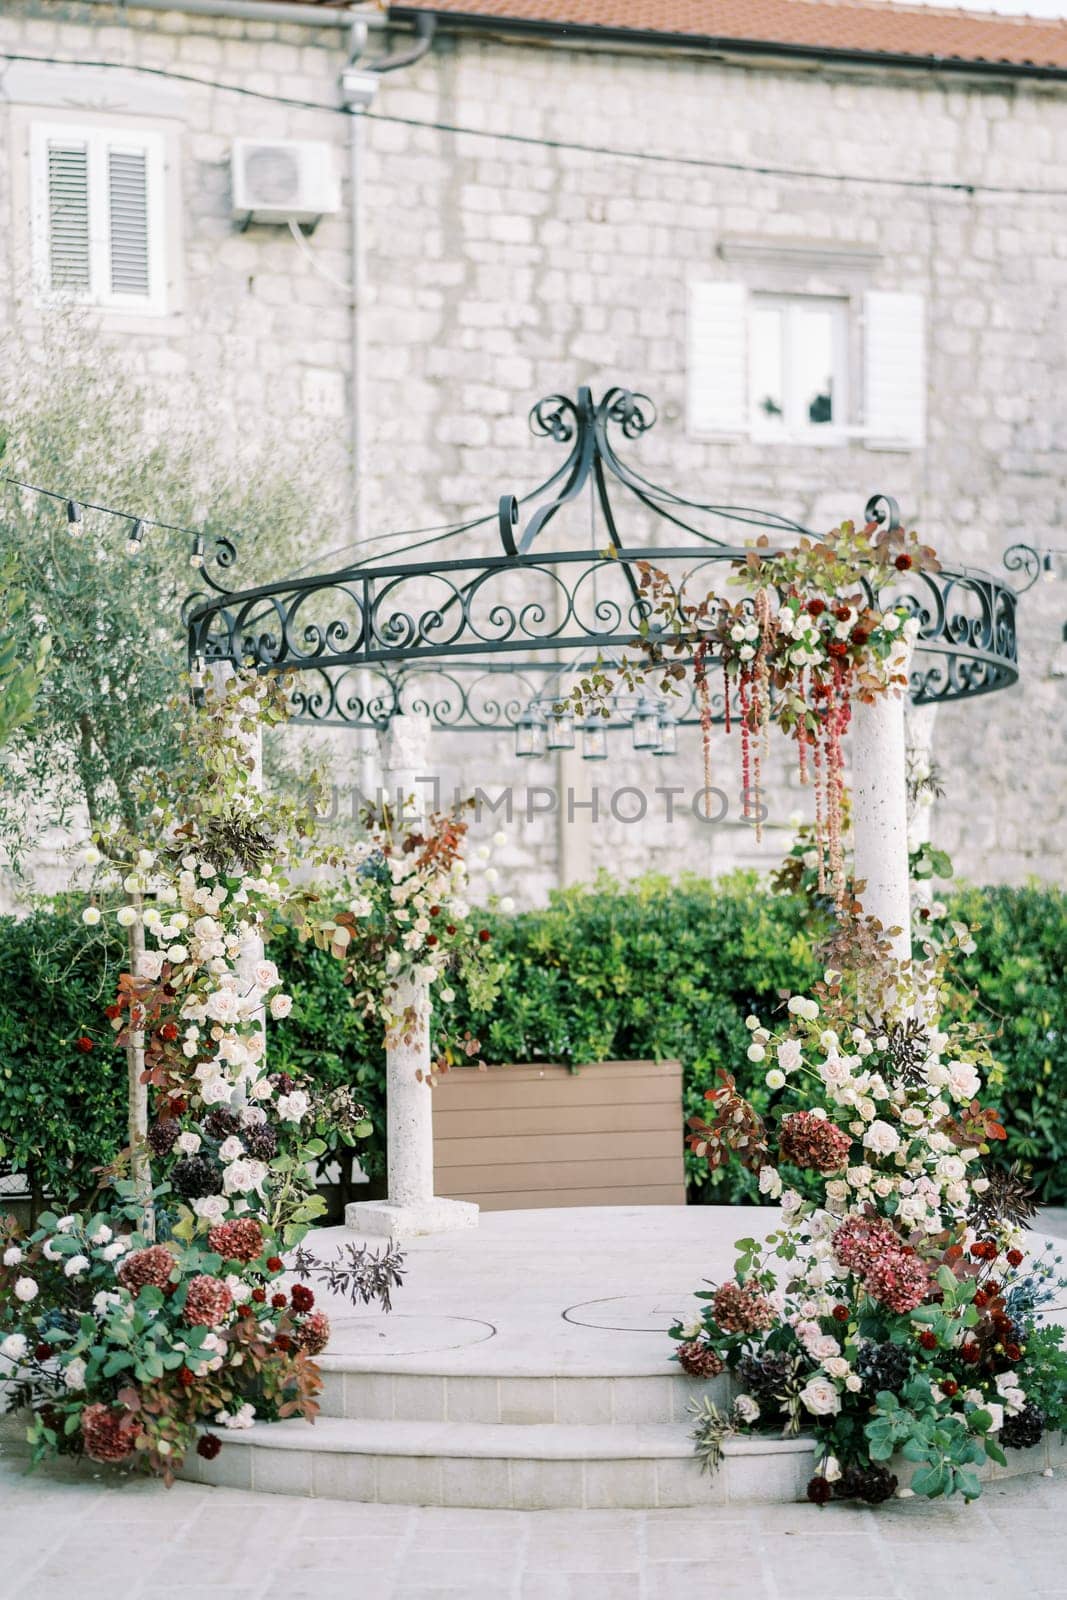 Wedding rotunda decorated with flowers in the courtyard of an ancient house. High quality photo